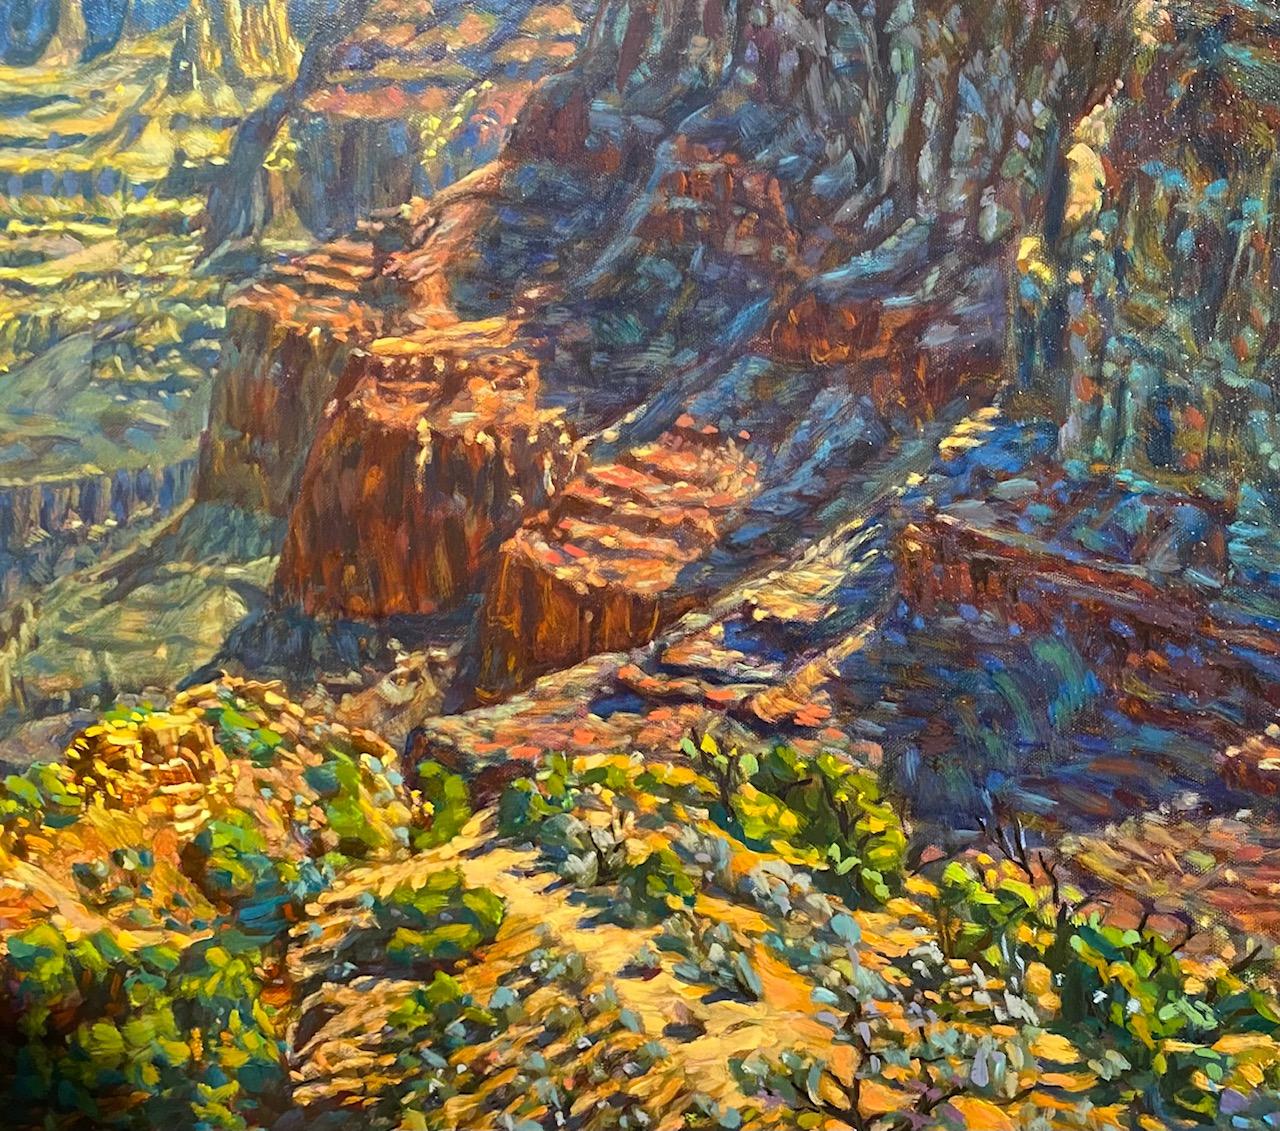 East of Eden, the Grand Canyon, original 30x40 expressionist landscape - Expressionist Painting by Charles Tersolo